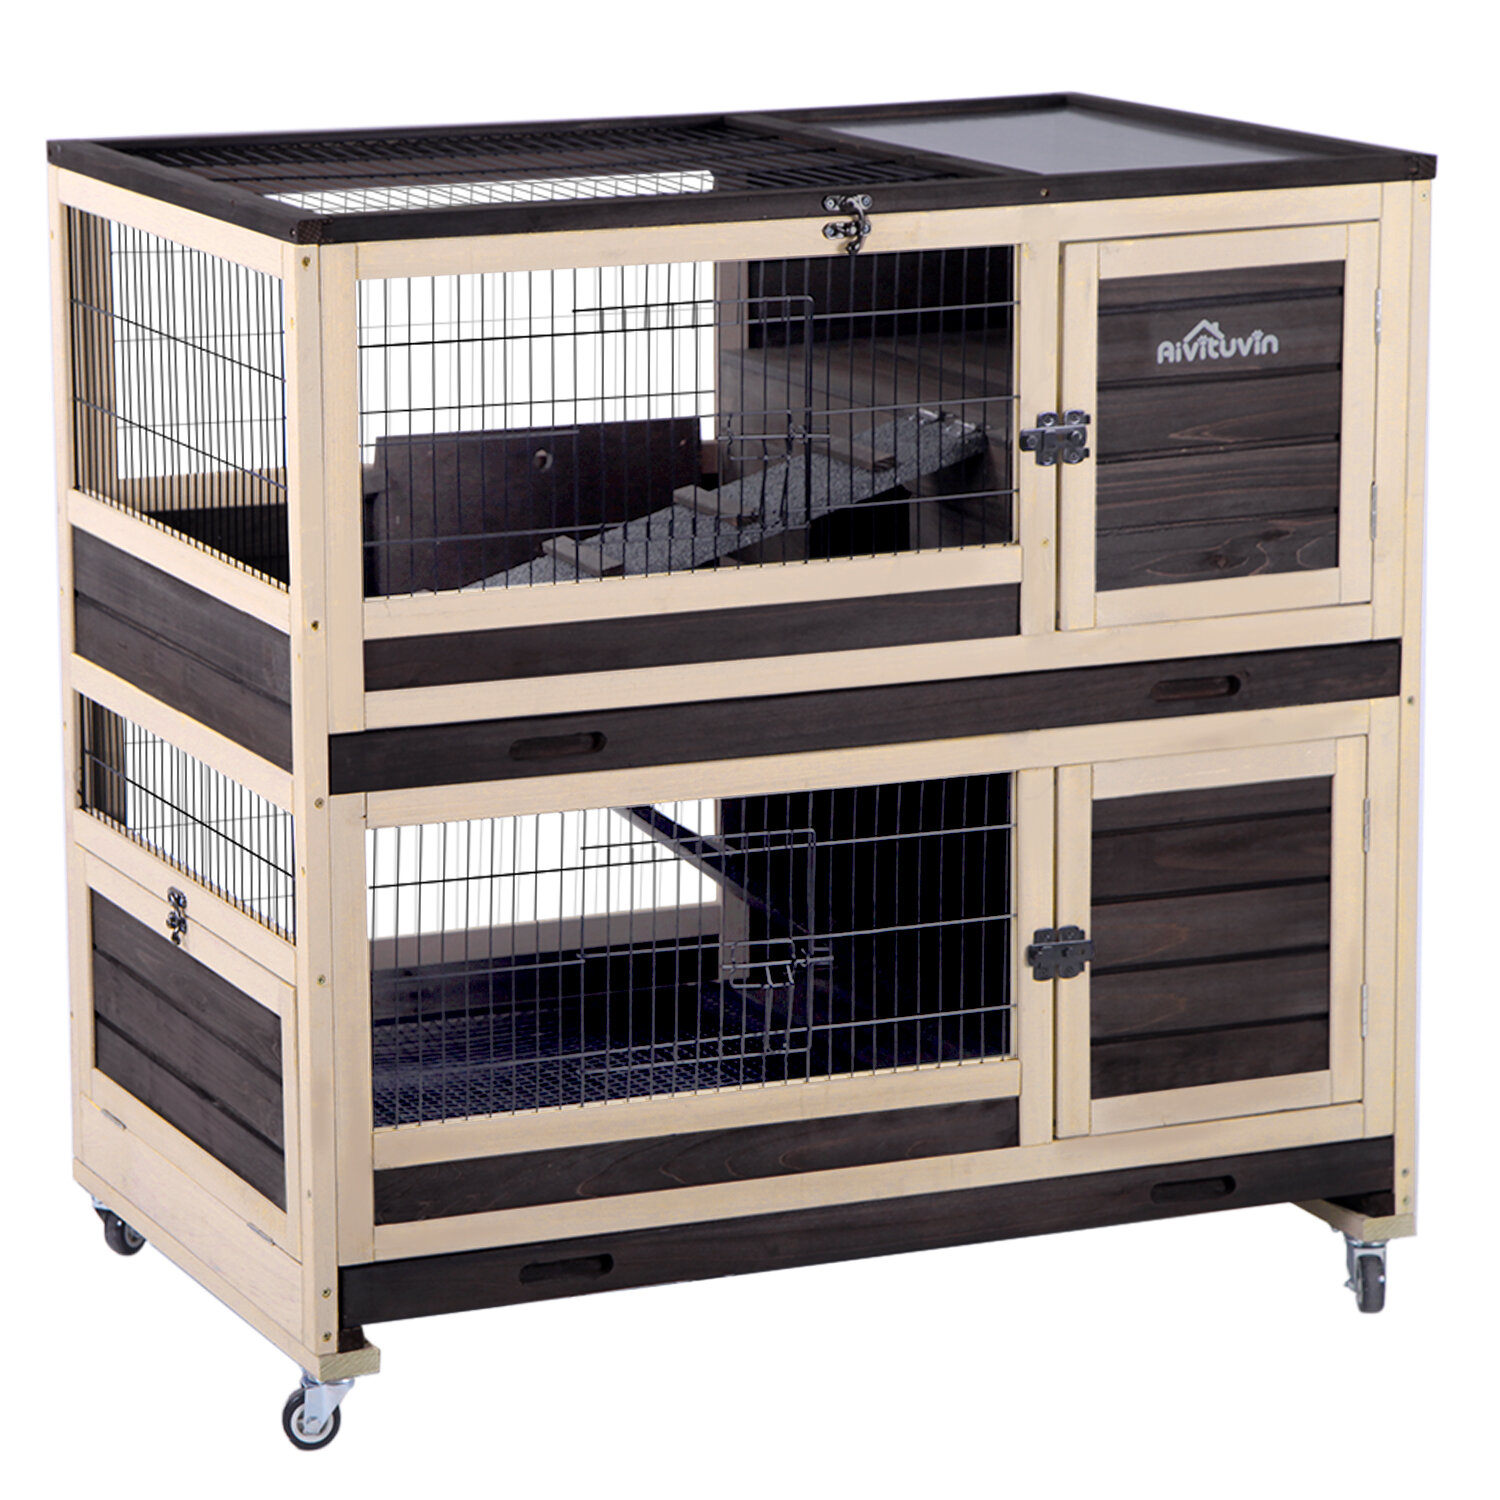 No Leak Wooden Bunny Cage with Plastic Tray Indoor Outdoor Bunny Hutch with Run GUTINNEEN Rabbit Hutch Expandable 